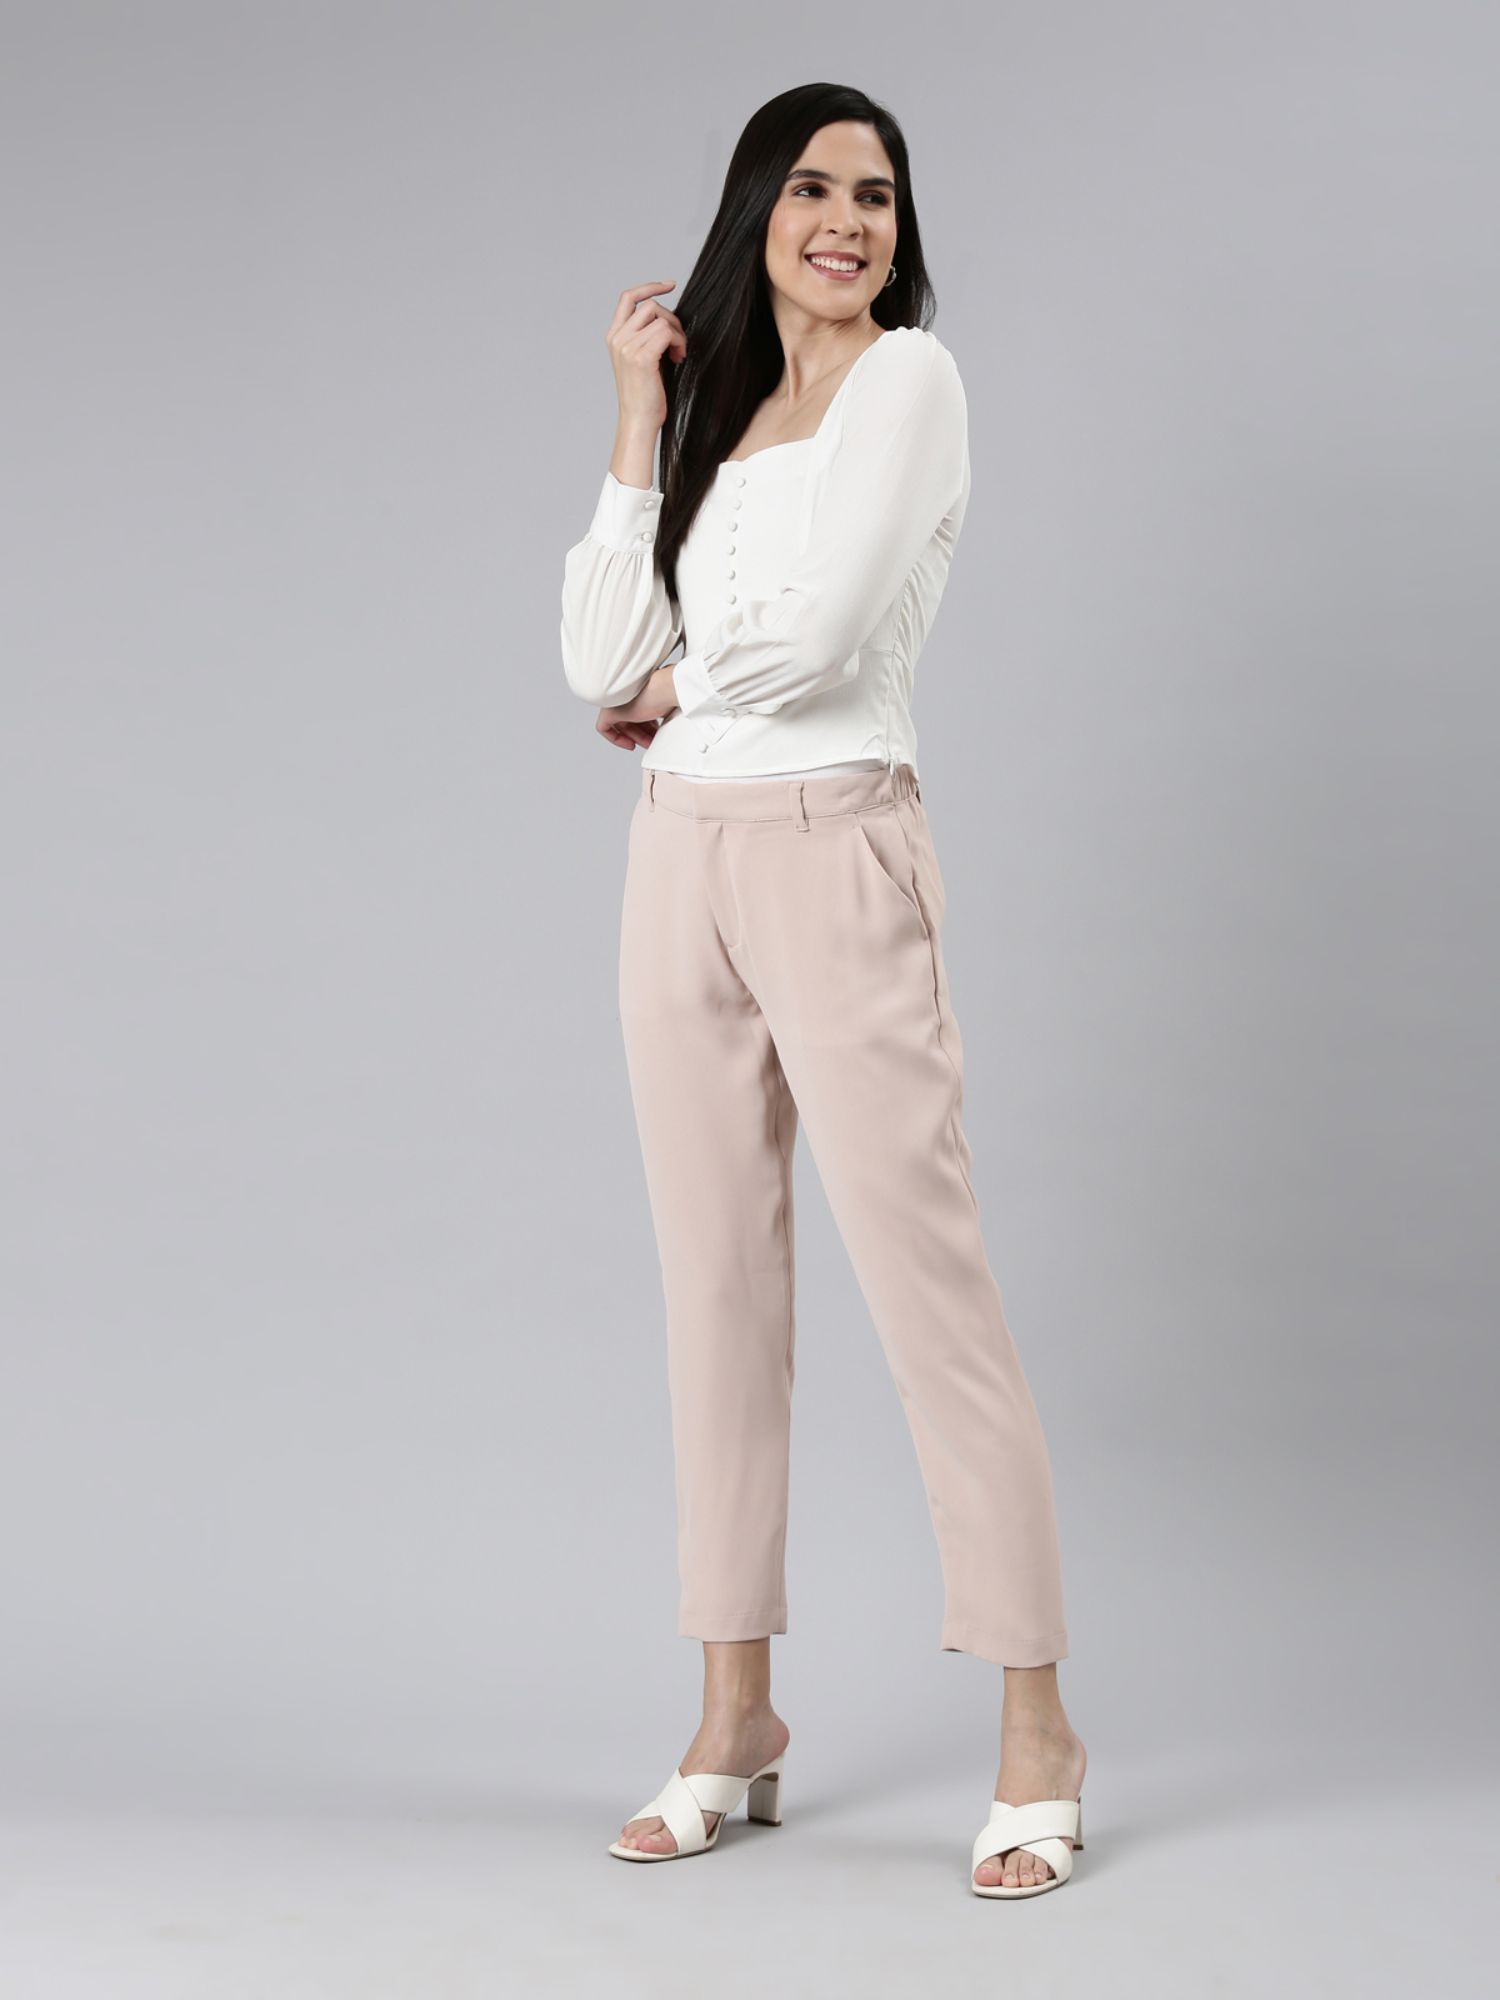 Buy GO COLORS Women Solid Mid Rise Formal Trousers Baby Pink at Amazon.in